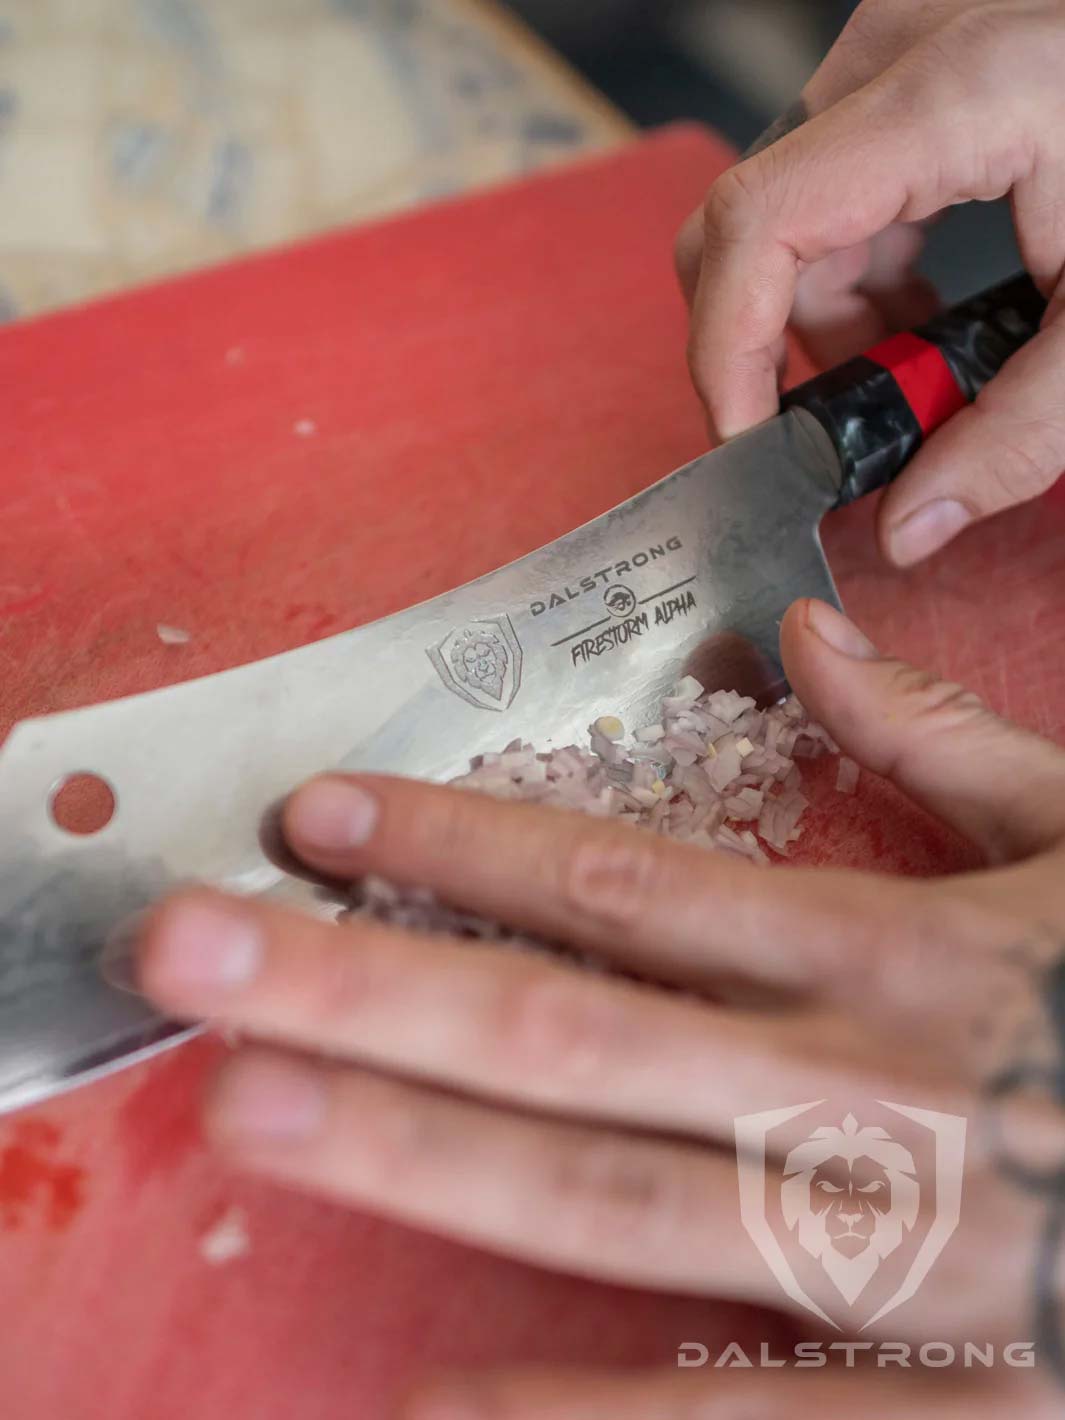 Chef & Cleaver Hybrid Knife 8 | The Crixus | Firestorm Alpha Series | Dalstrong